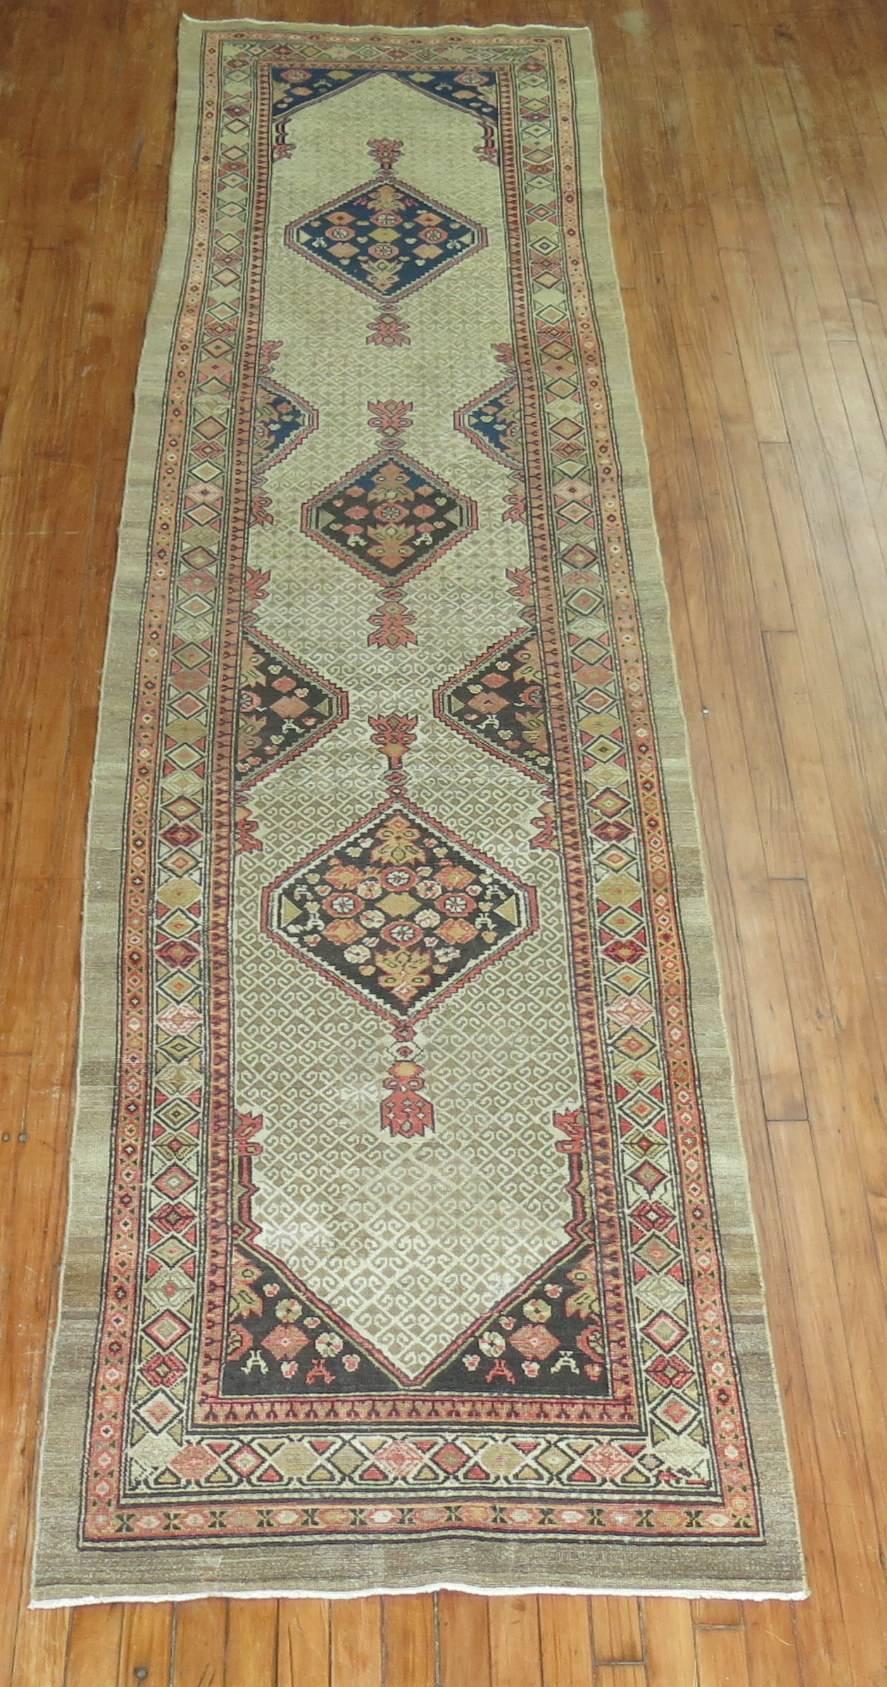 An authentic early 20th century Persian Serab runner with a triple medallion geometric motif predominantly in camel and blue.